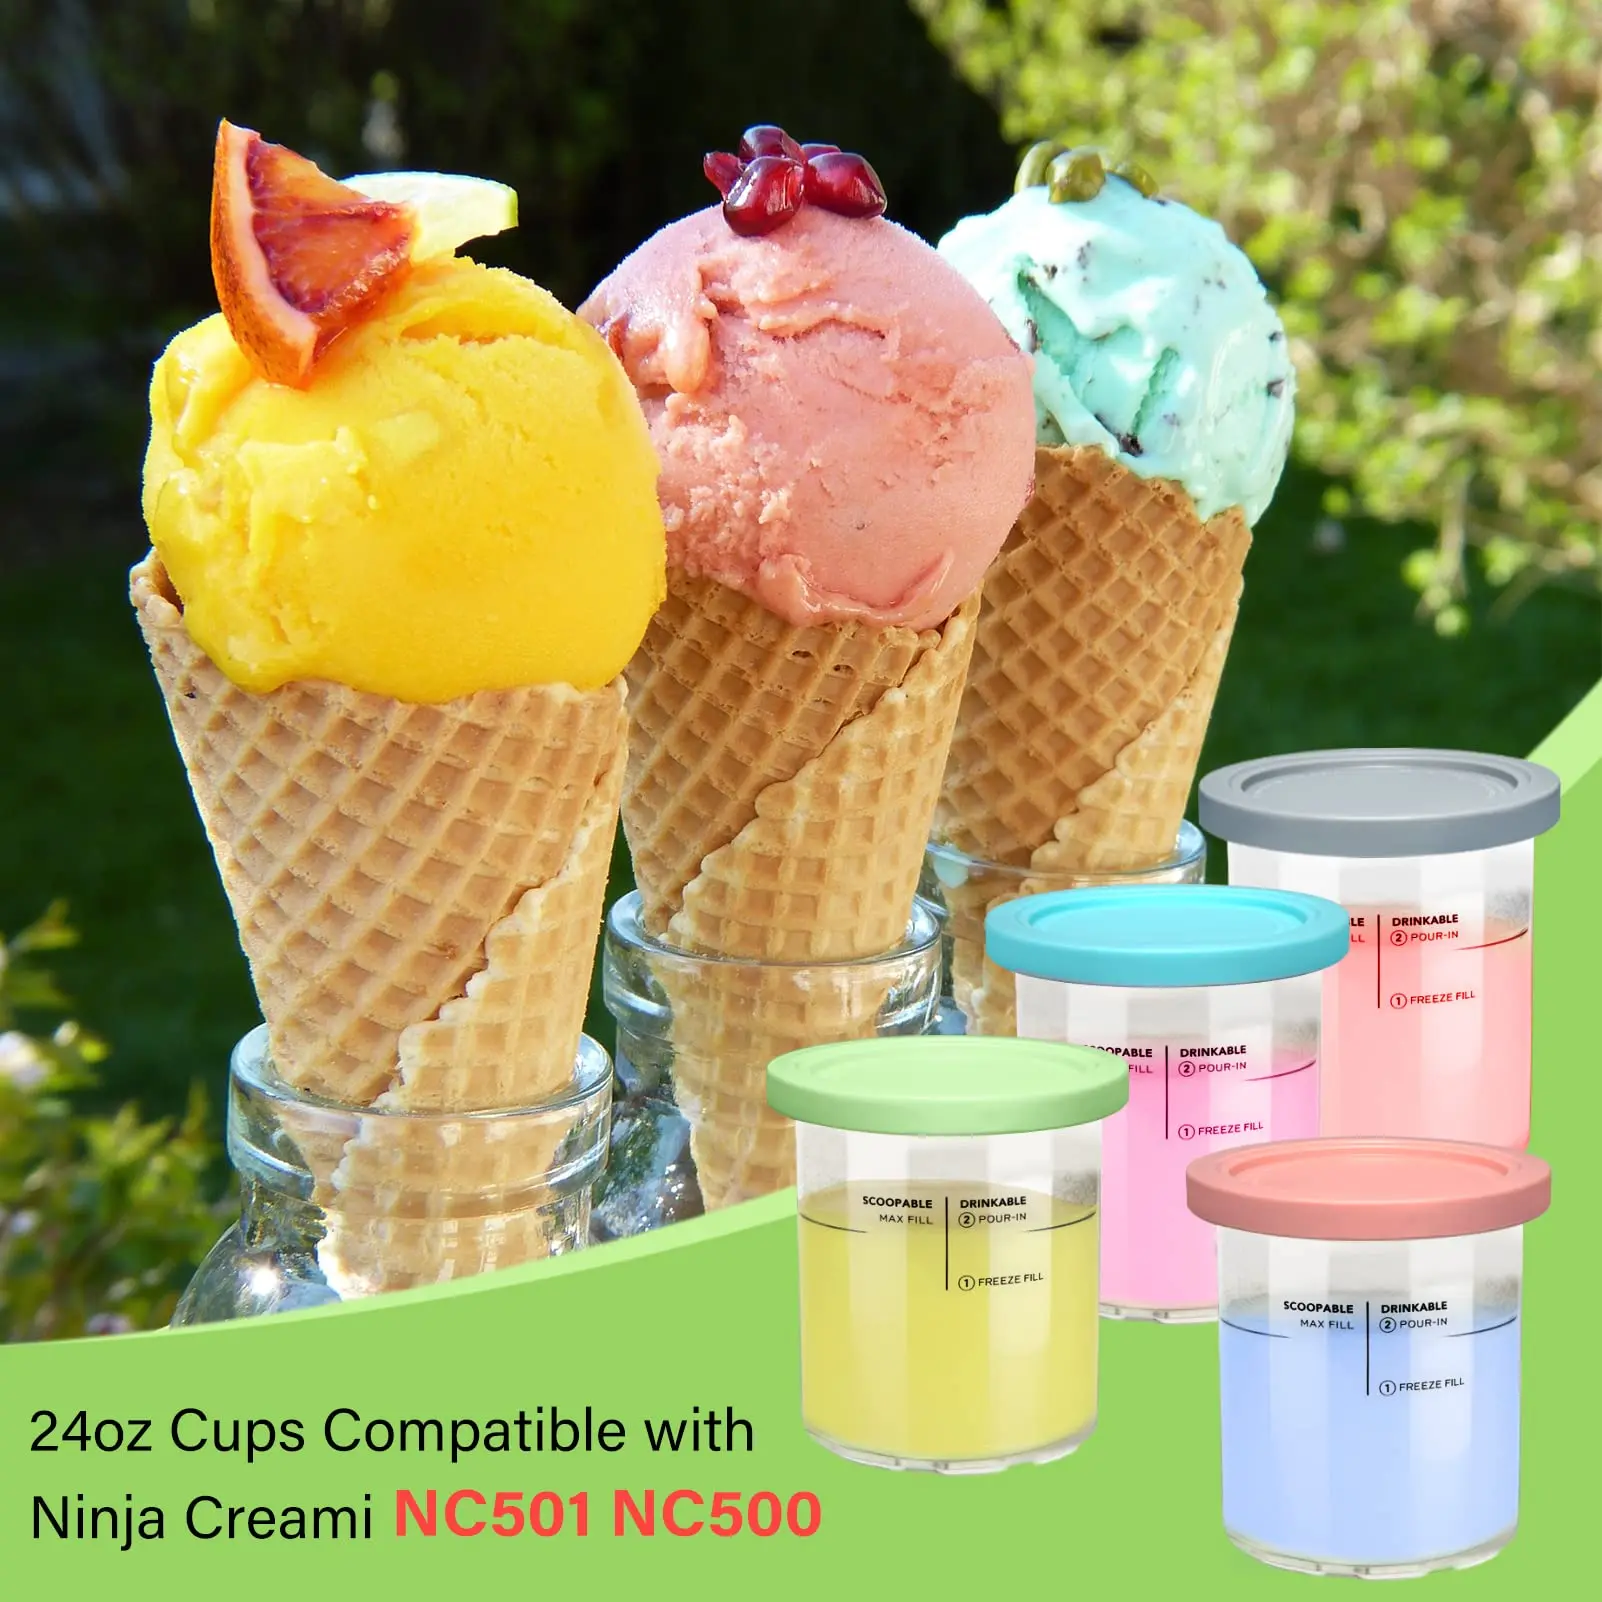 XL Family Size Ice Cream Pint Container, Compatible with Ninja NC501 CREAMi  D